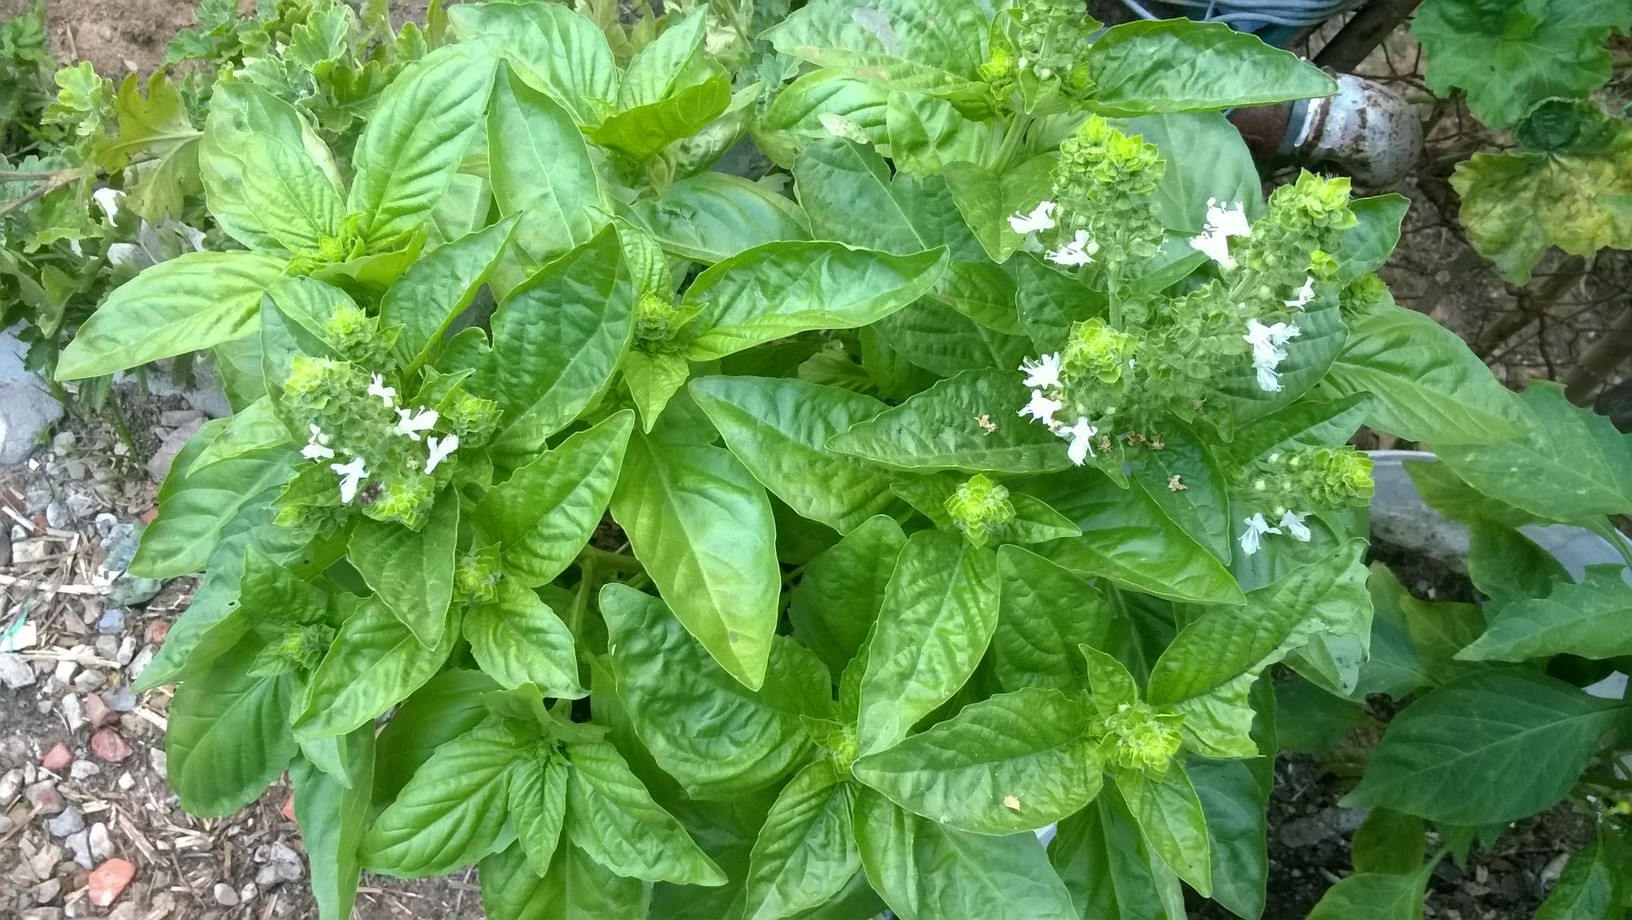 Basil flowers are small and white, and grow from a central inflorescence that emerges from the central stem. Basil flowers are quite edible